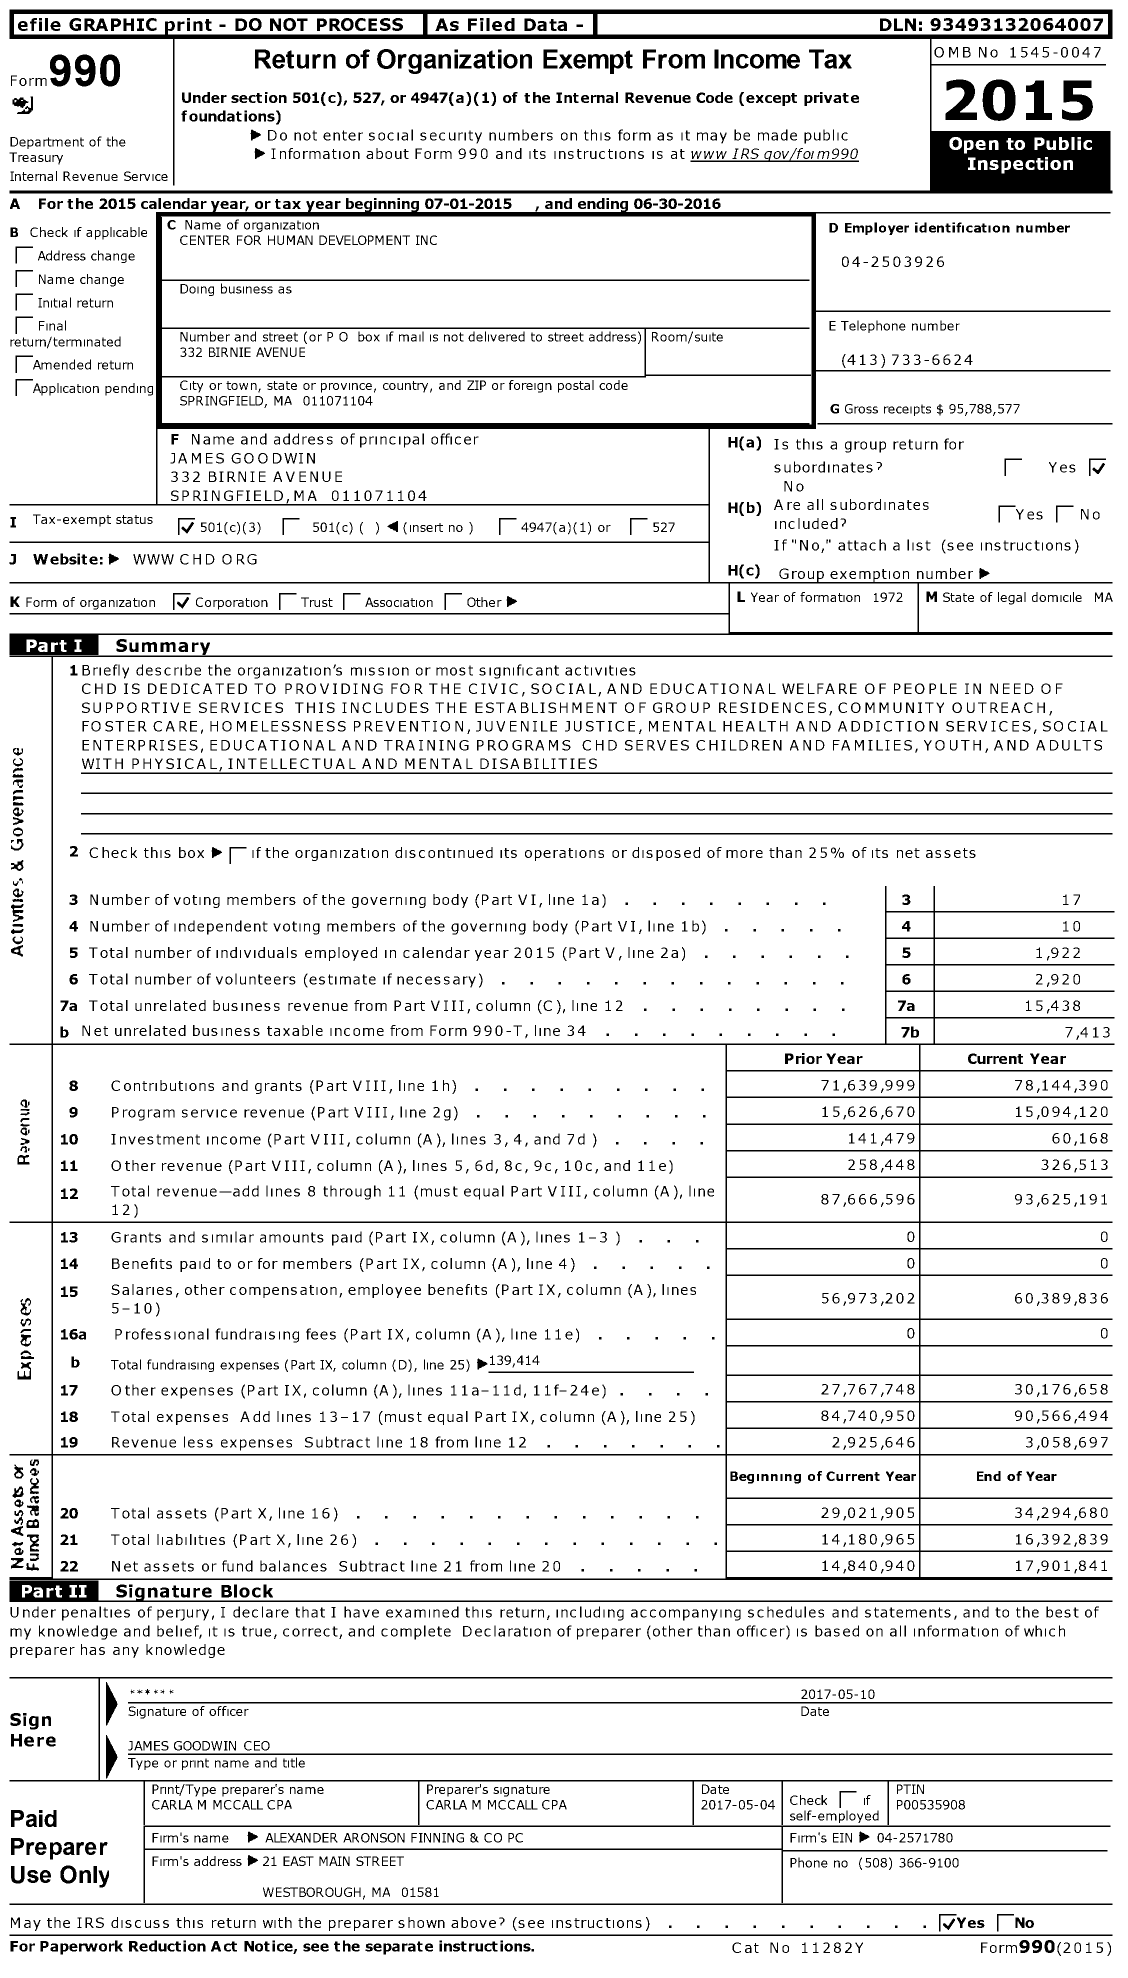 Image of first page of 2015 Form 990 for Center for Human Development (CHD)